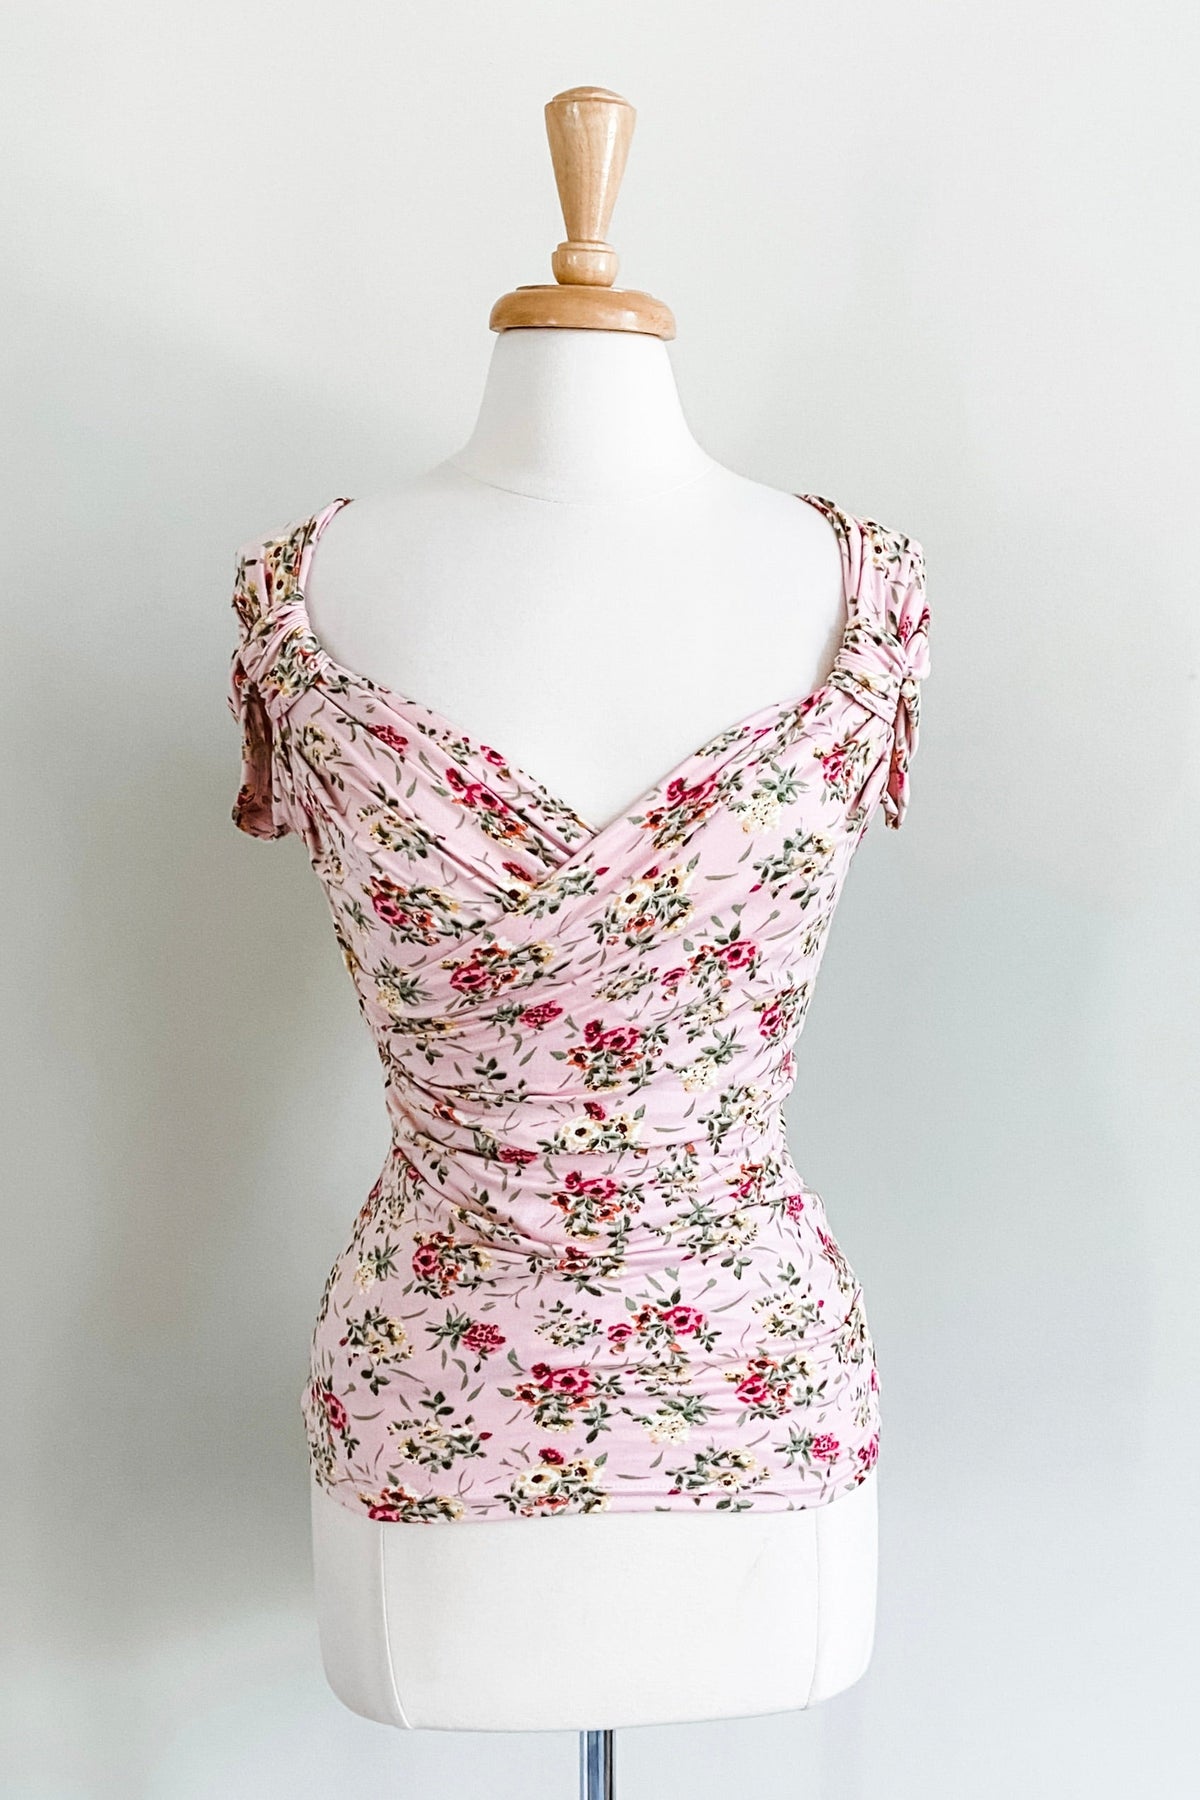 Diane Kroe Cross Top (Baby Pink Floral) - Warm Weather Capsule Collection